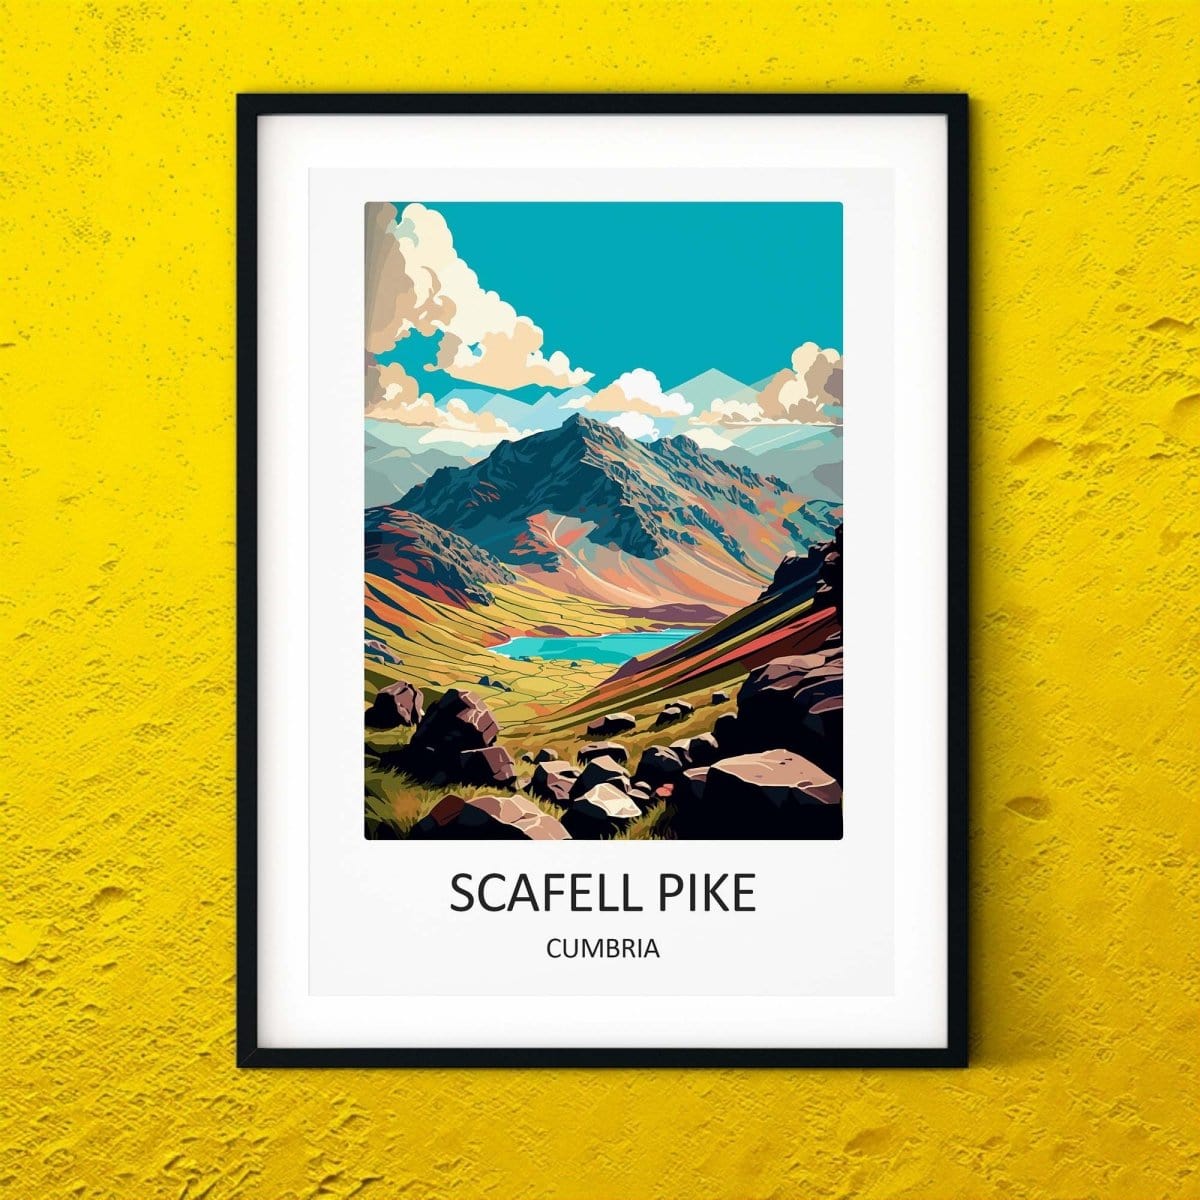 Scafell Pike travel posters UK Cumbria Mountain print